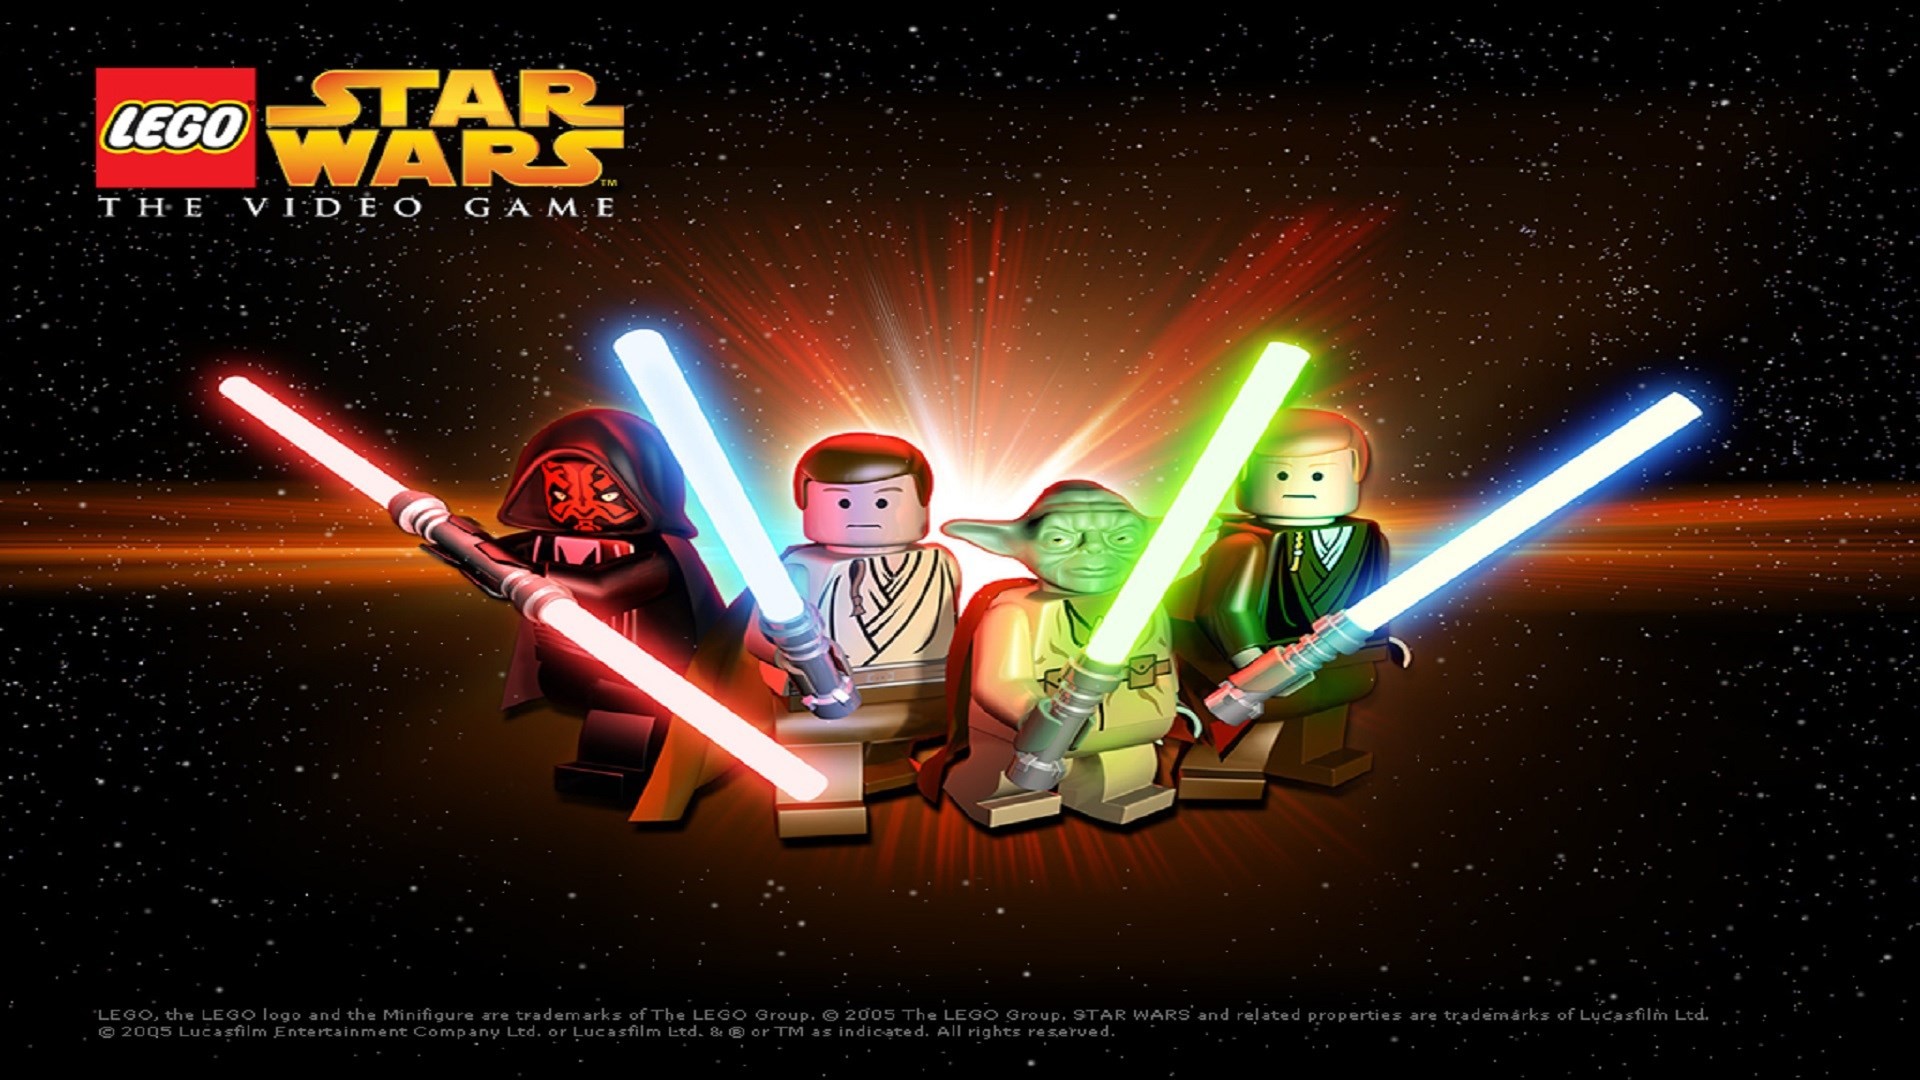 Computer wallpaper for lego star wars the video game, Dabria Turner 2017 03